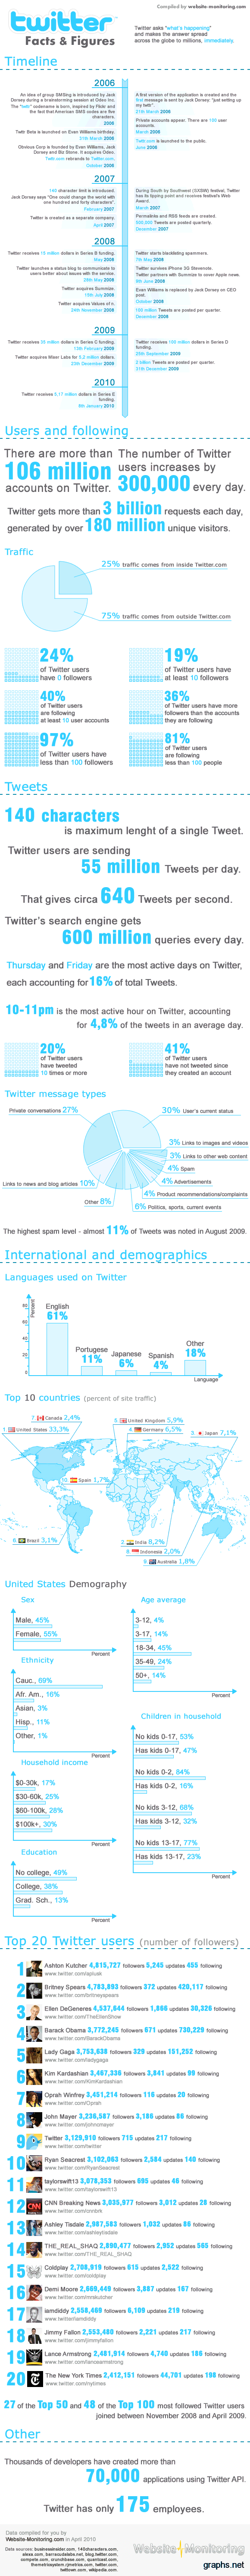 Facts and Figures about Twitter